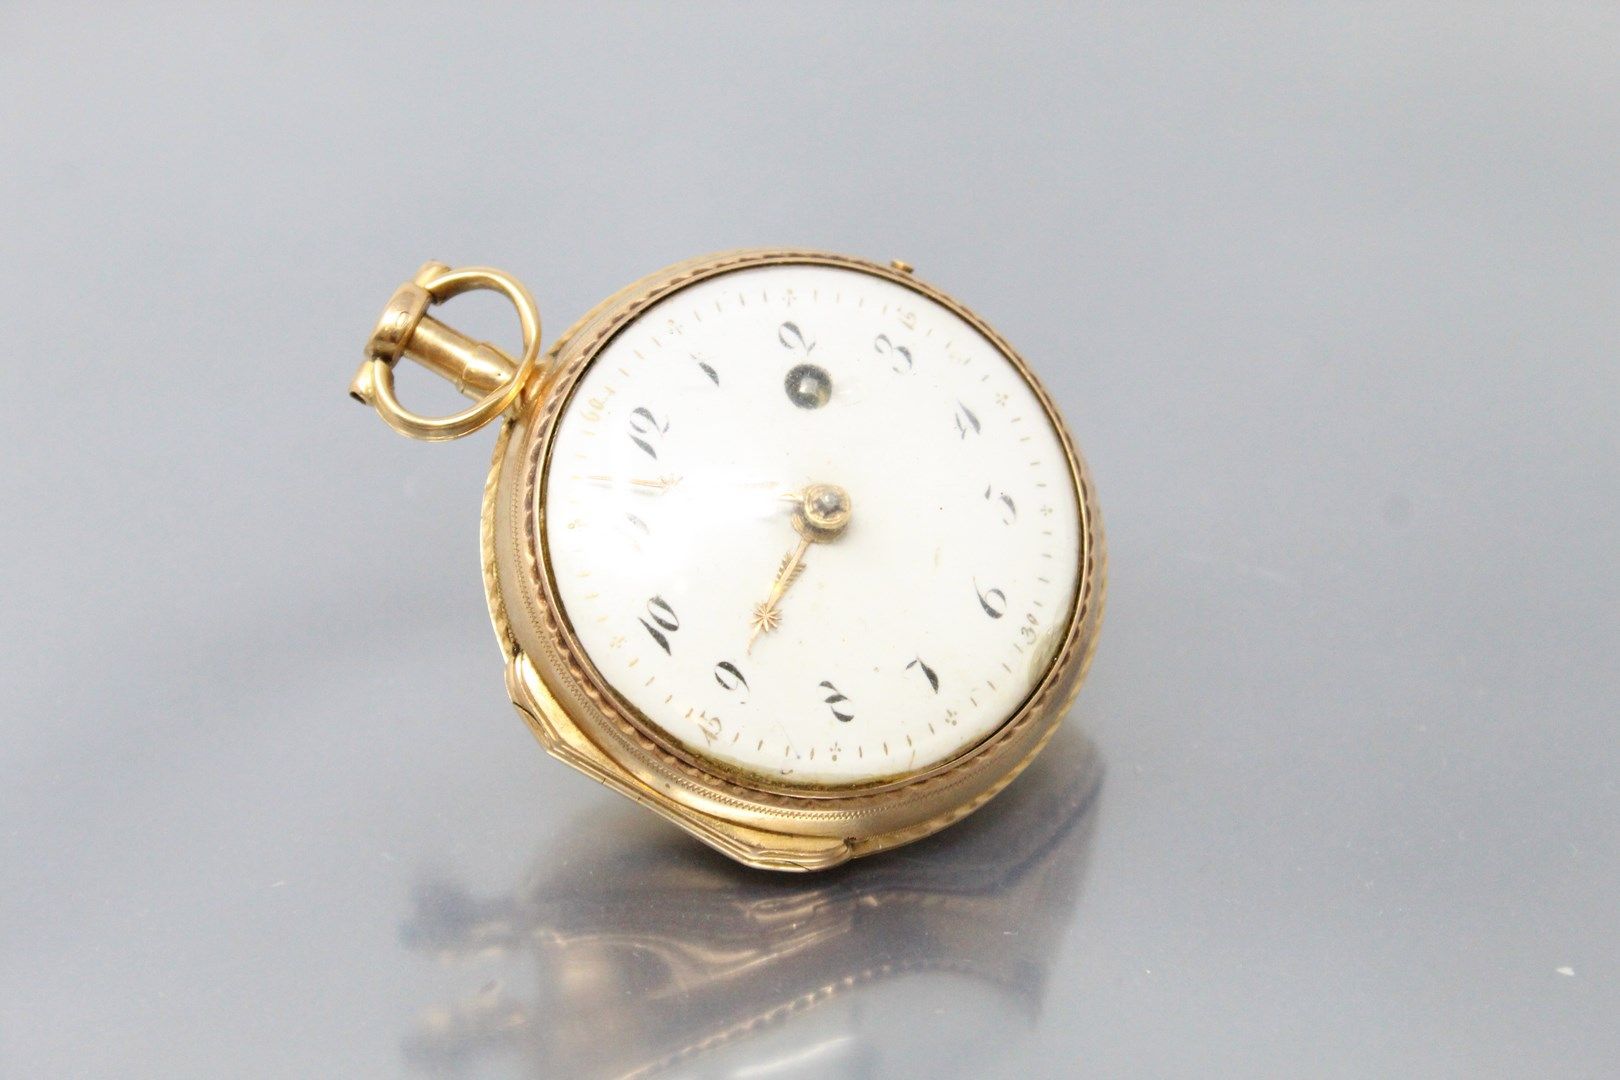 Null FRAGNEREAU in Paris

Late 18th century.

Gold watch. Round case on hinge, s&hellip;